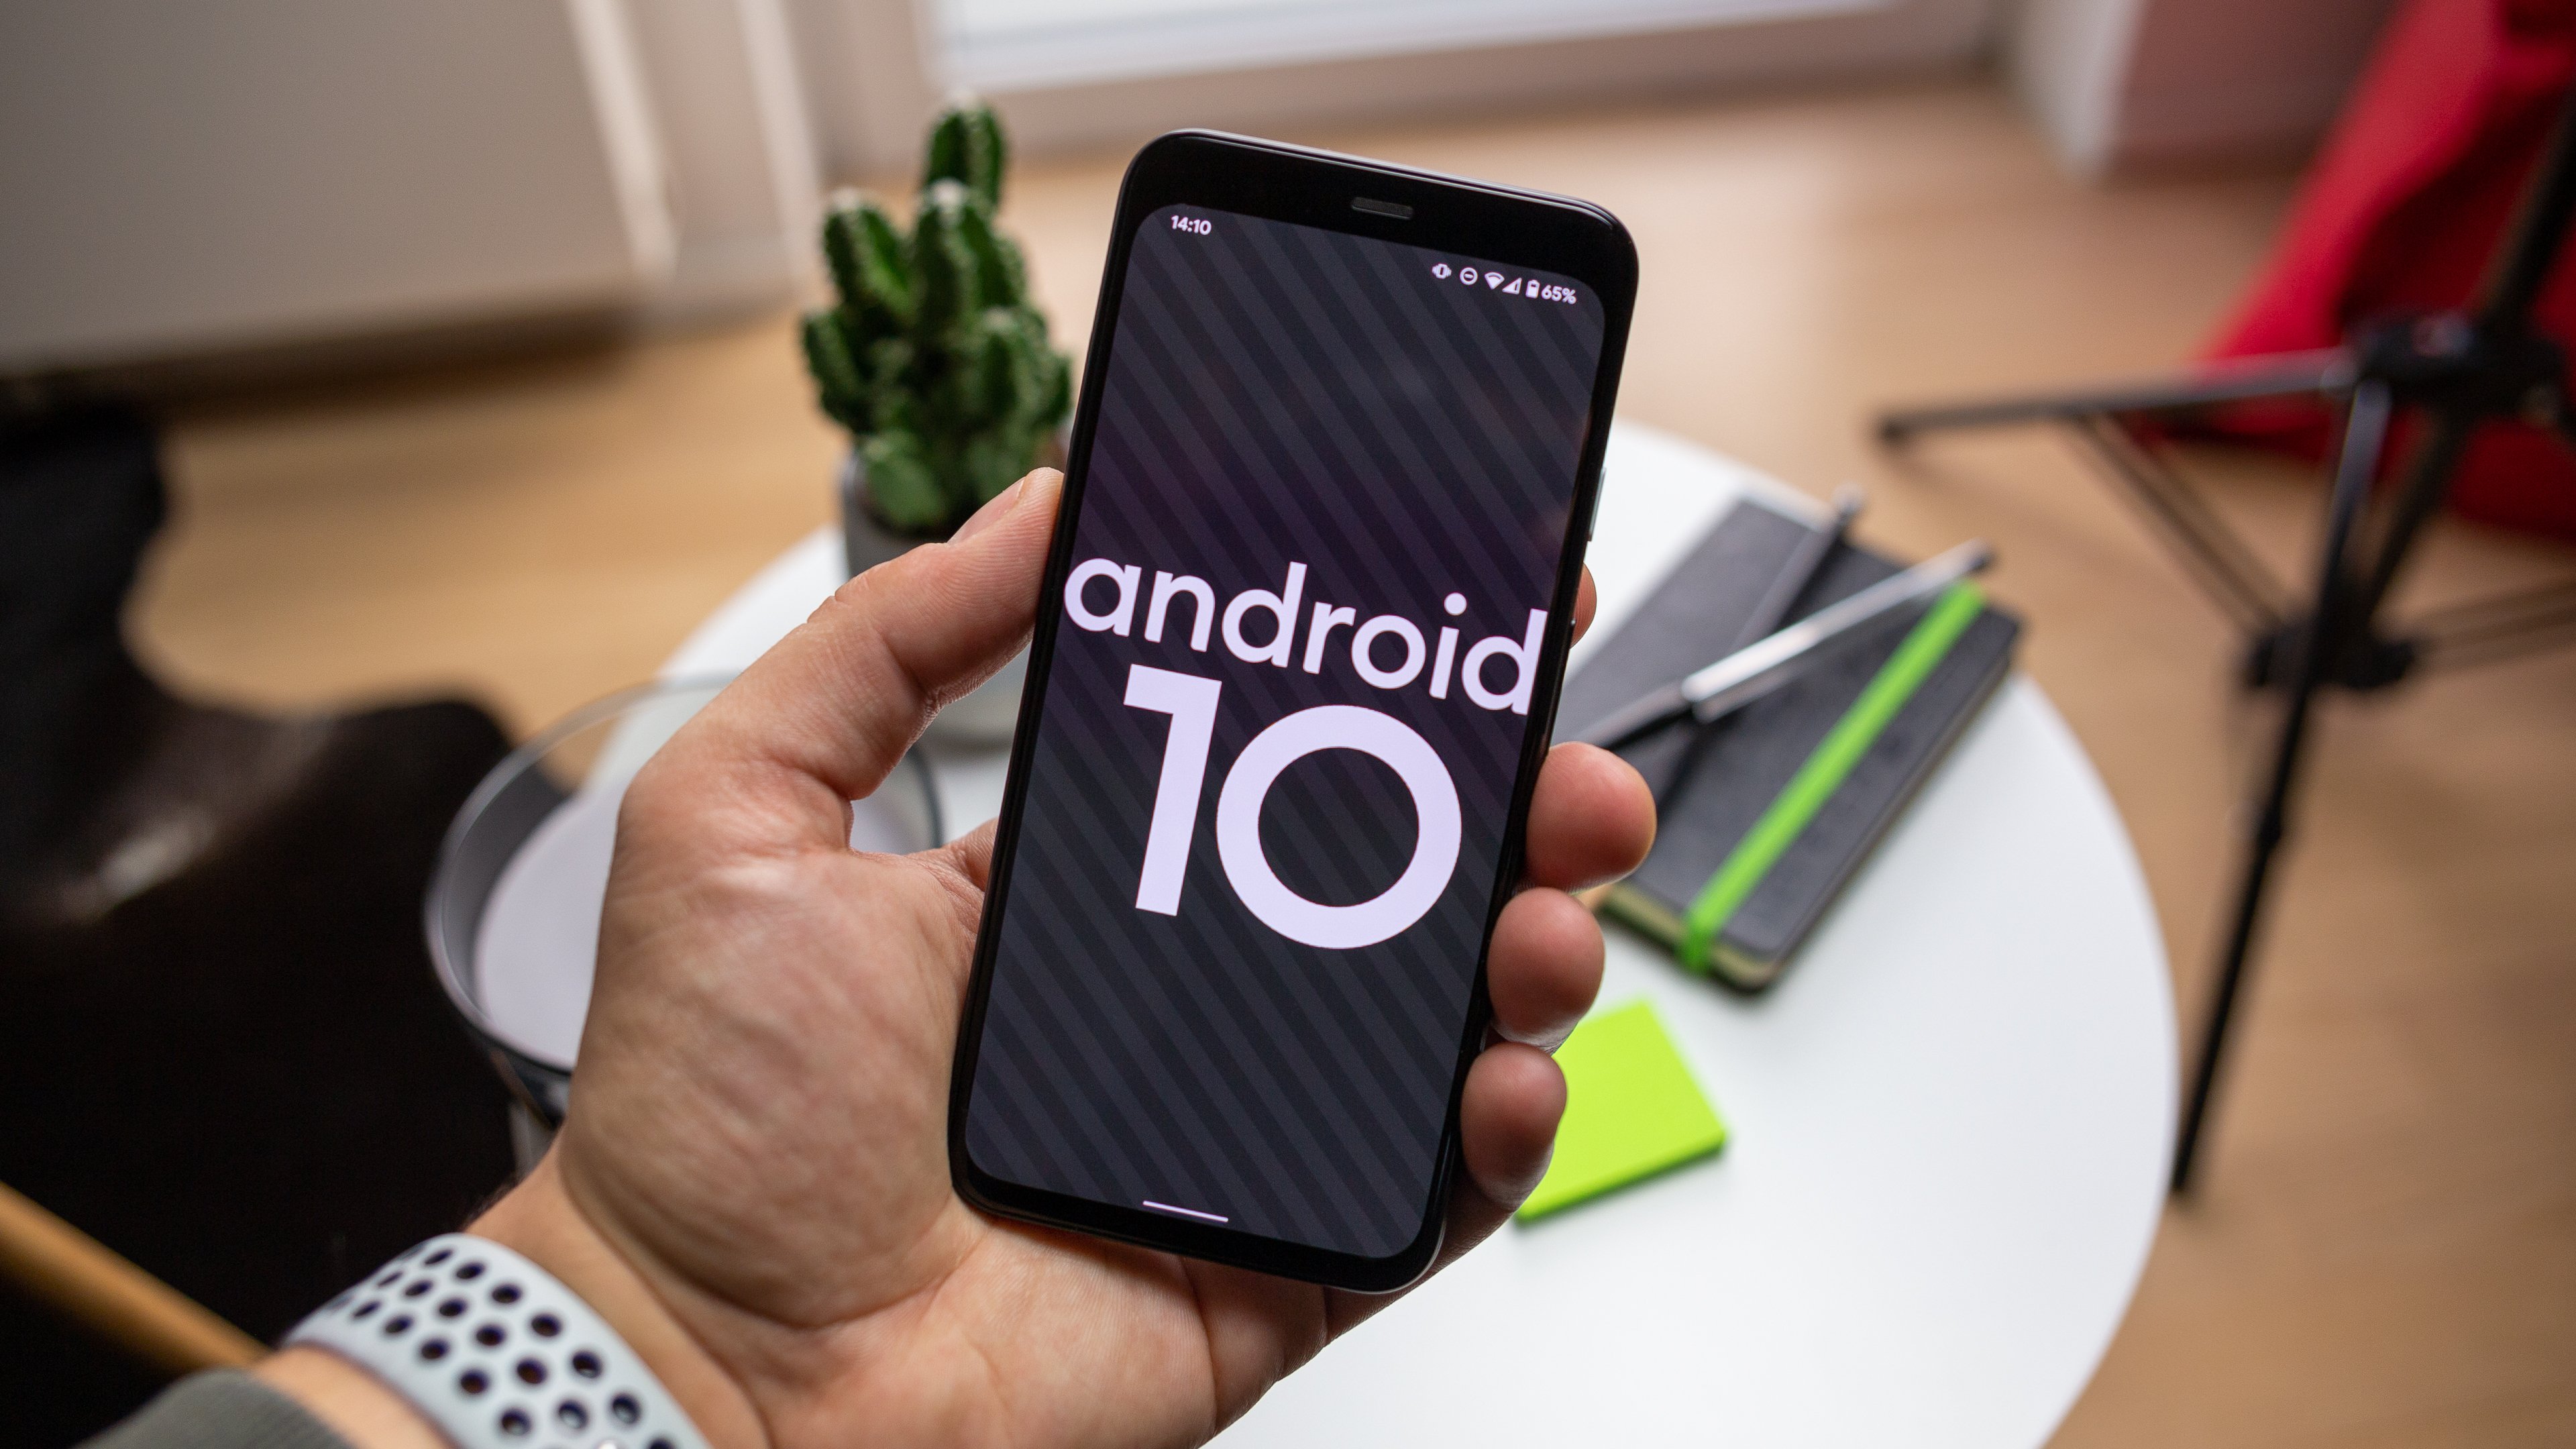 can i download android 10 on my phone